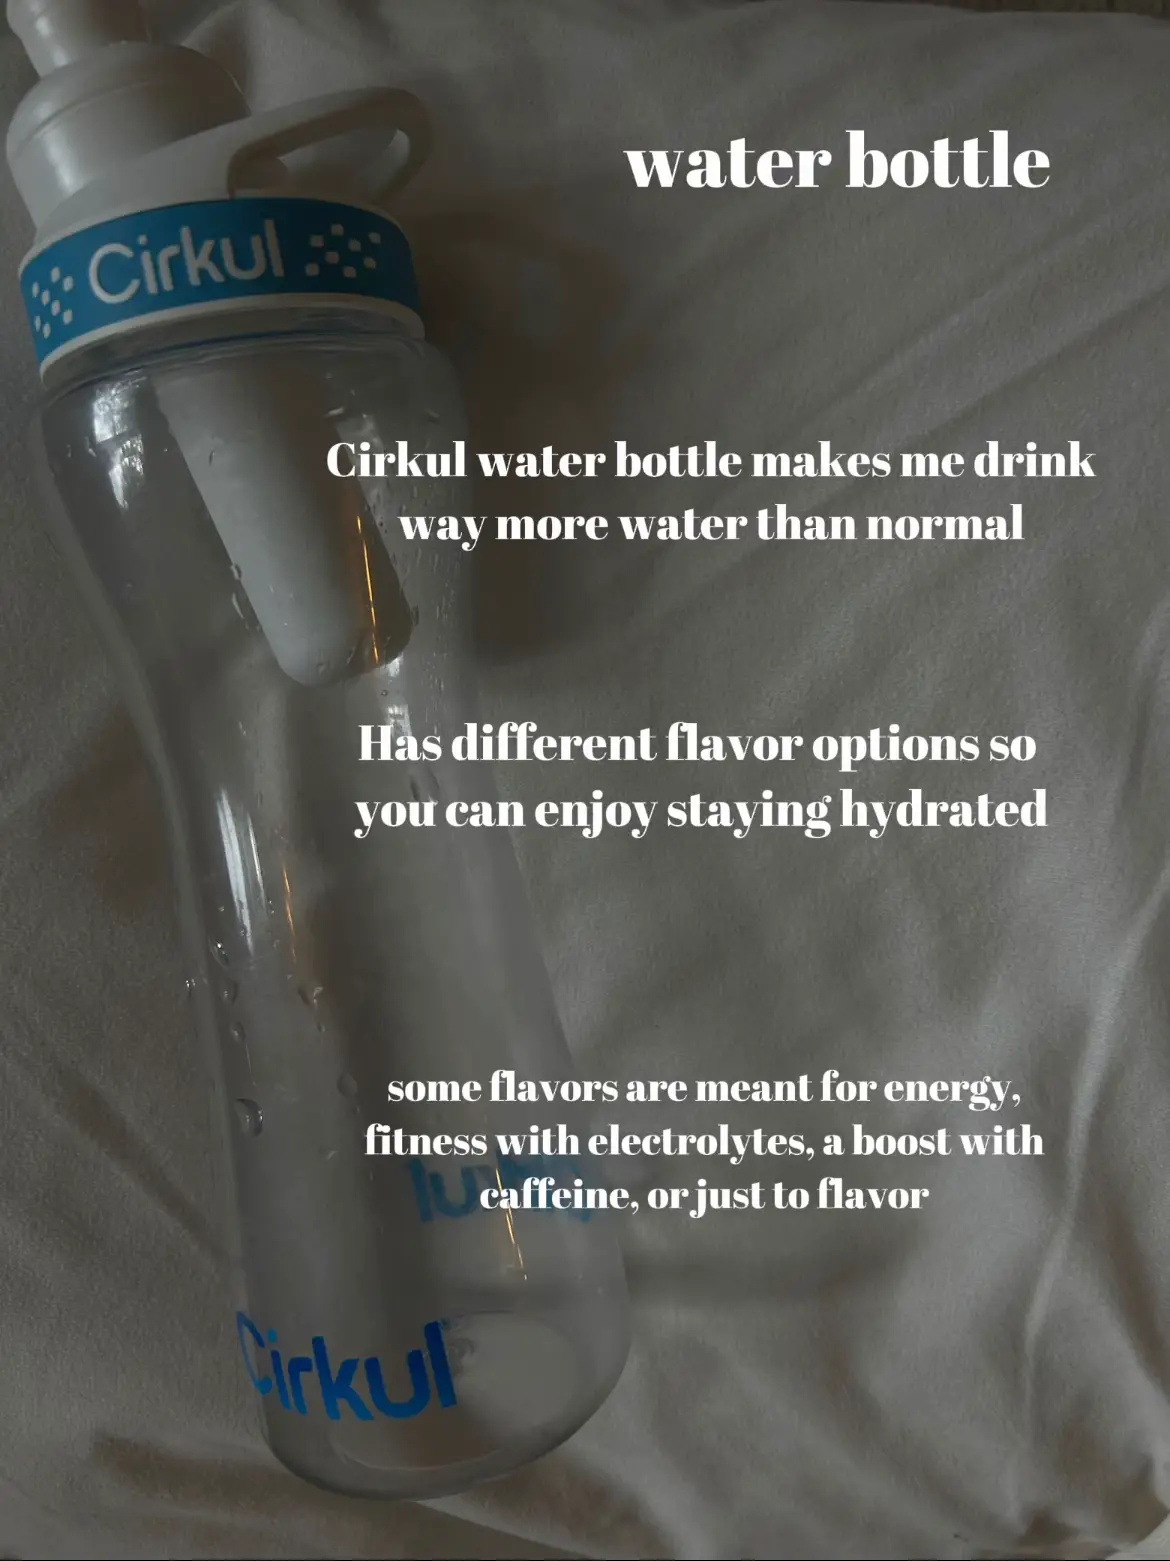 Cirkul water bottles, Gallery posted by natalie dillon